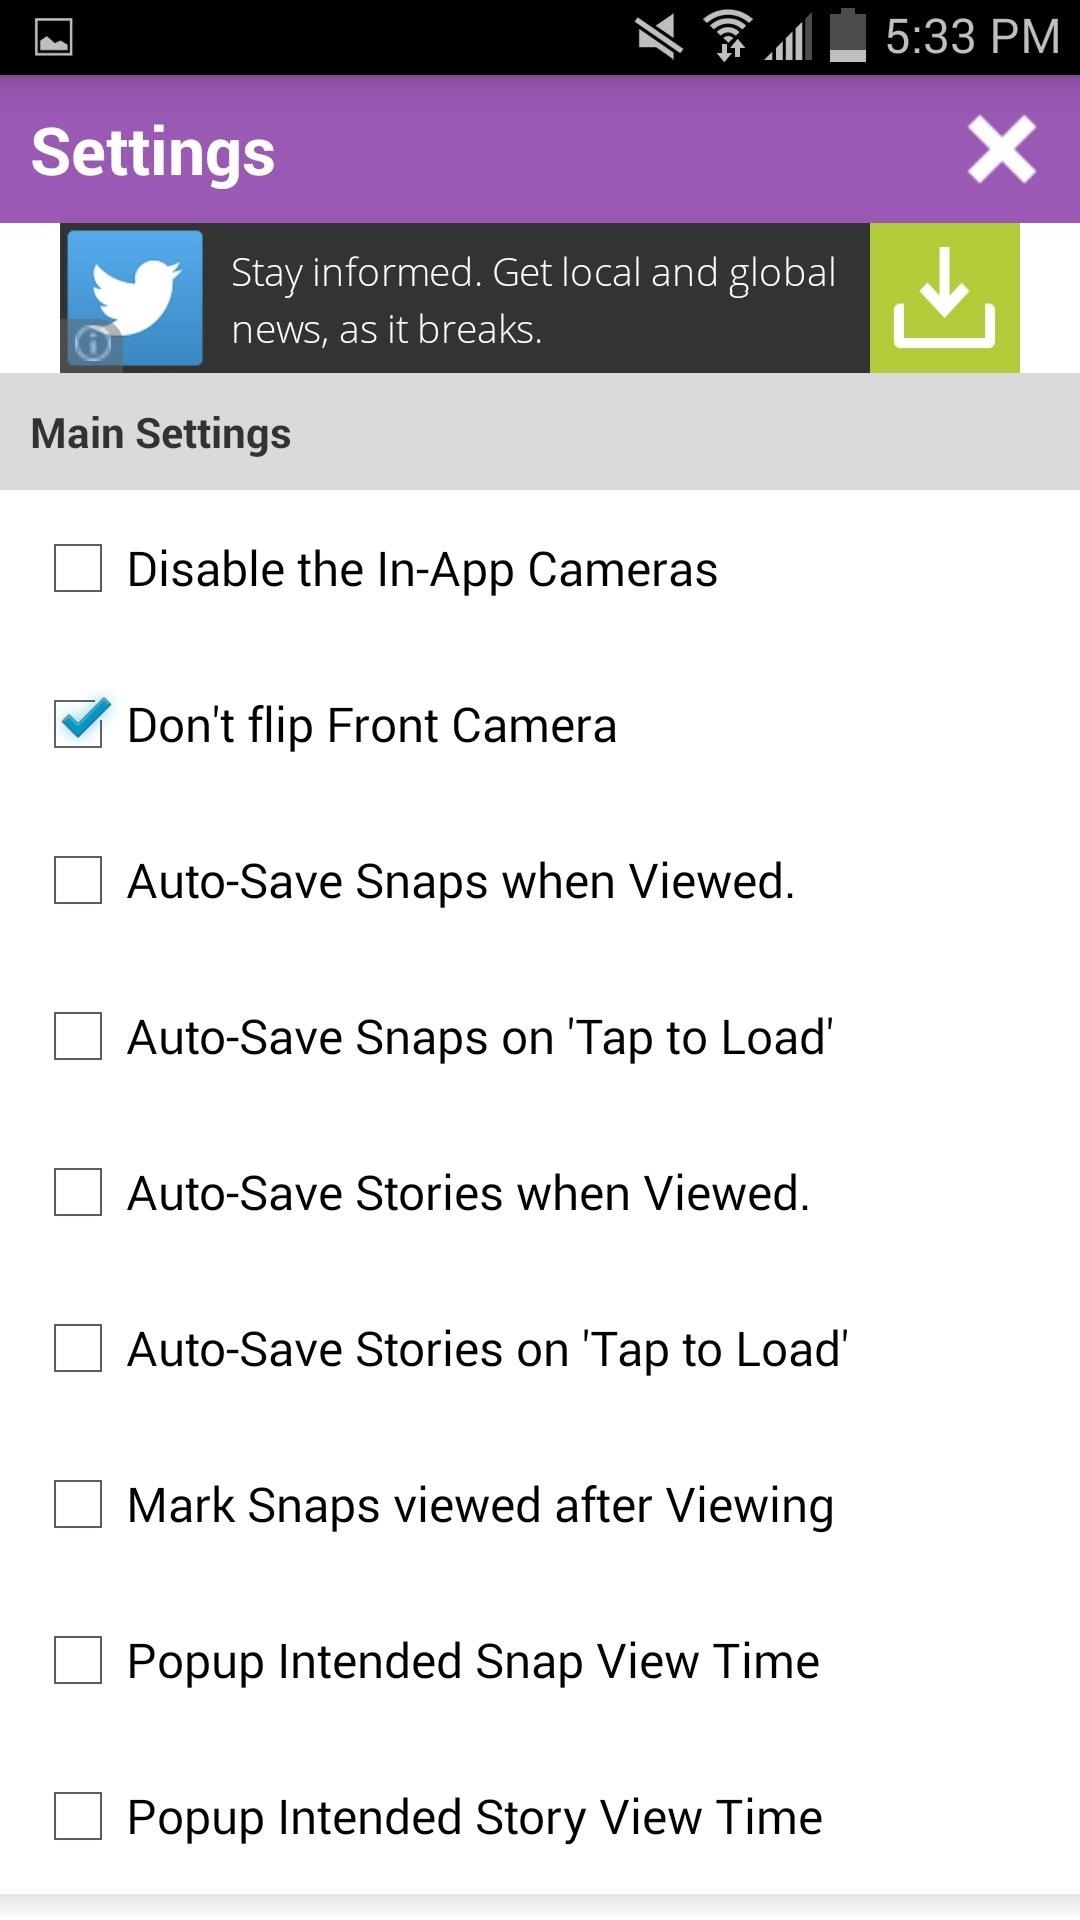 How to Save Snapchats on Android Without Being Detected (No Root Required)